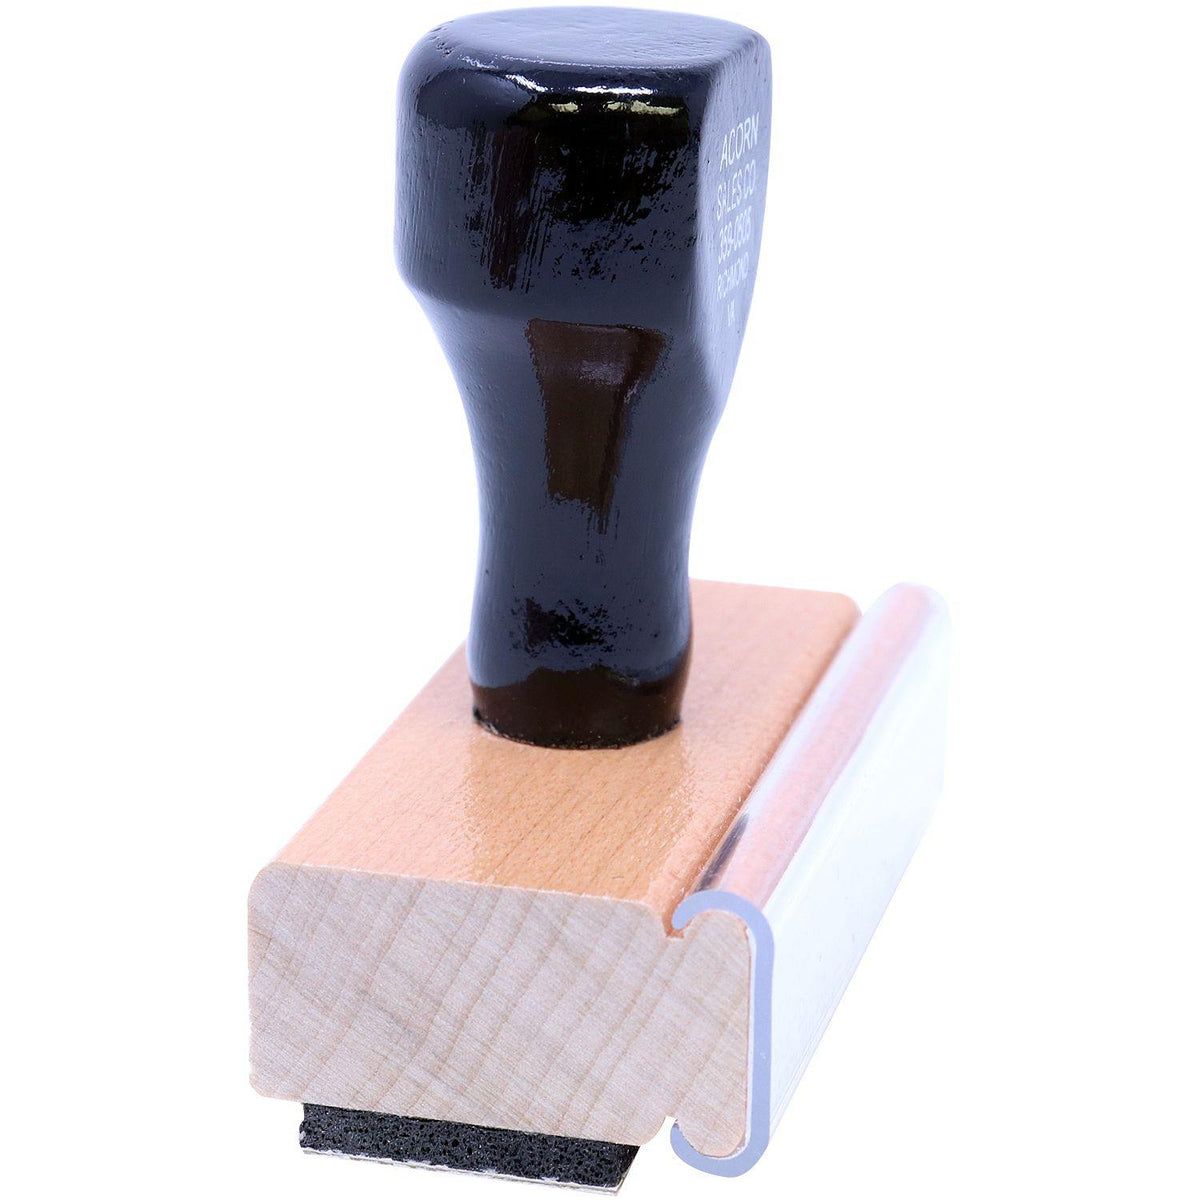 Large You Did It Rubber Stamp - Engineer Seal Stamps - Brand_Acorn, Impression Size_Large, Stamp Type_Regular Stamp, Type of Use_Teacher